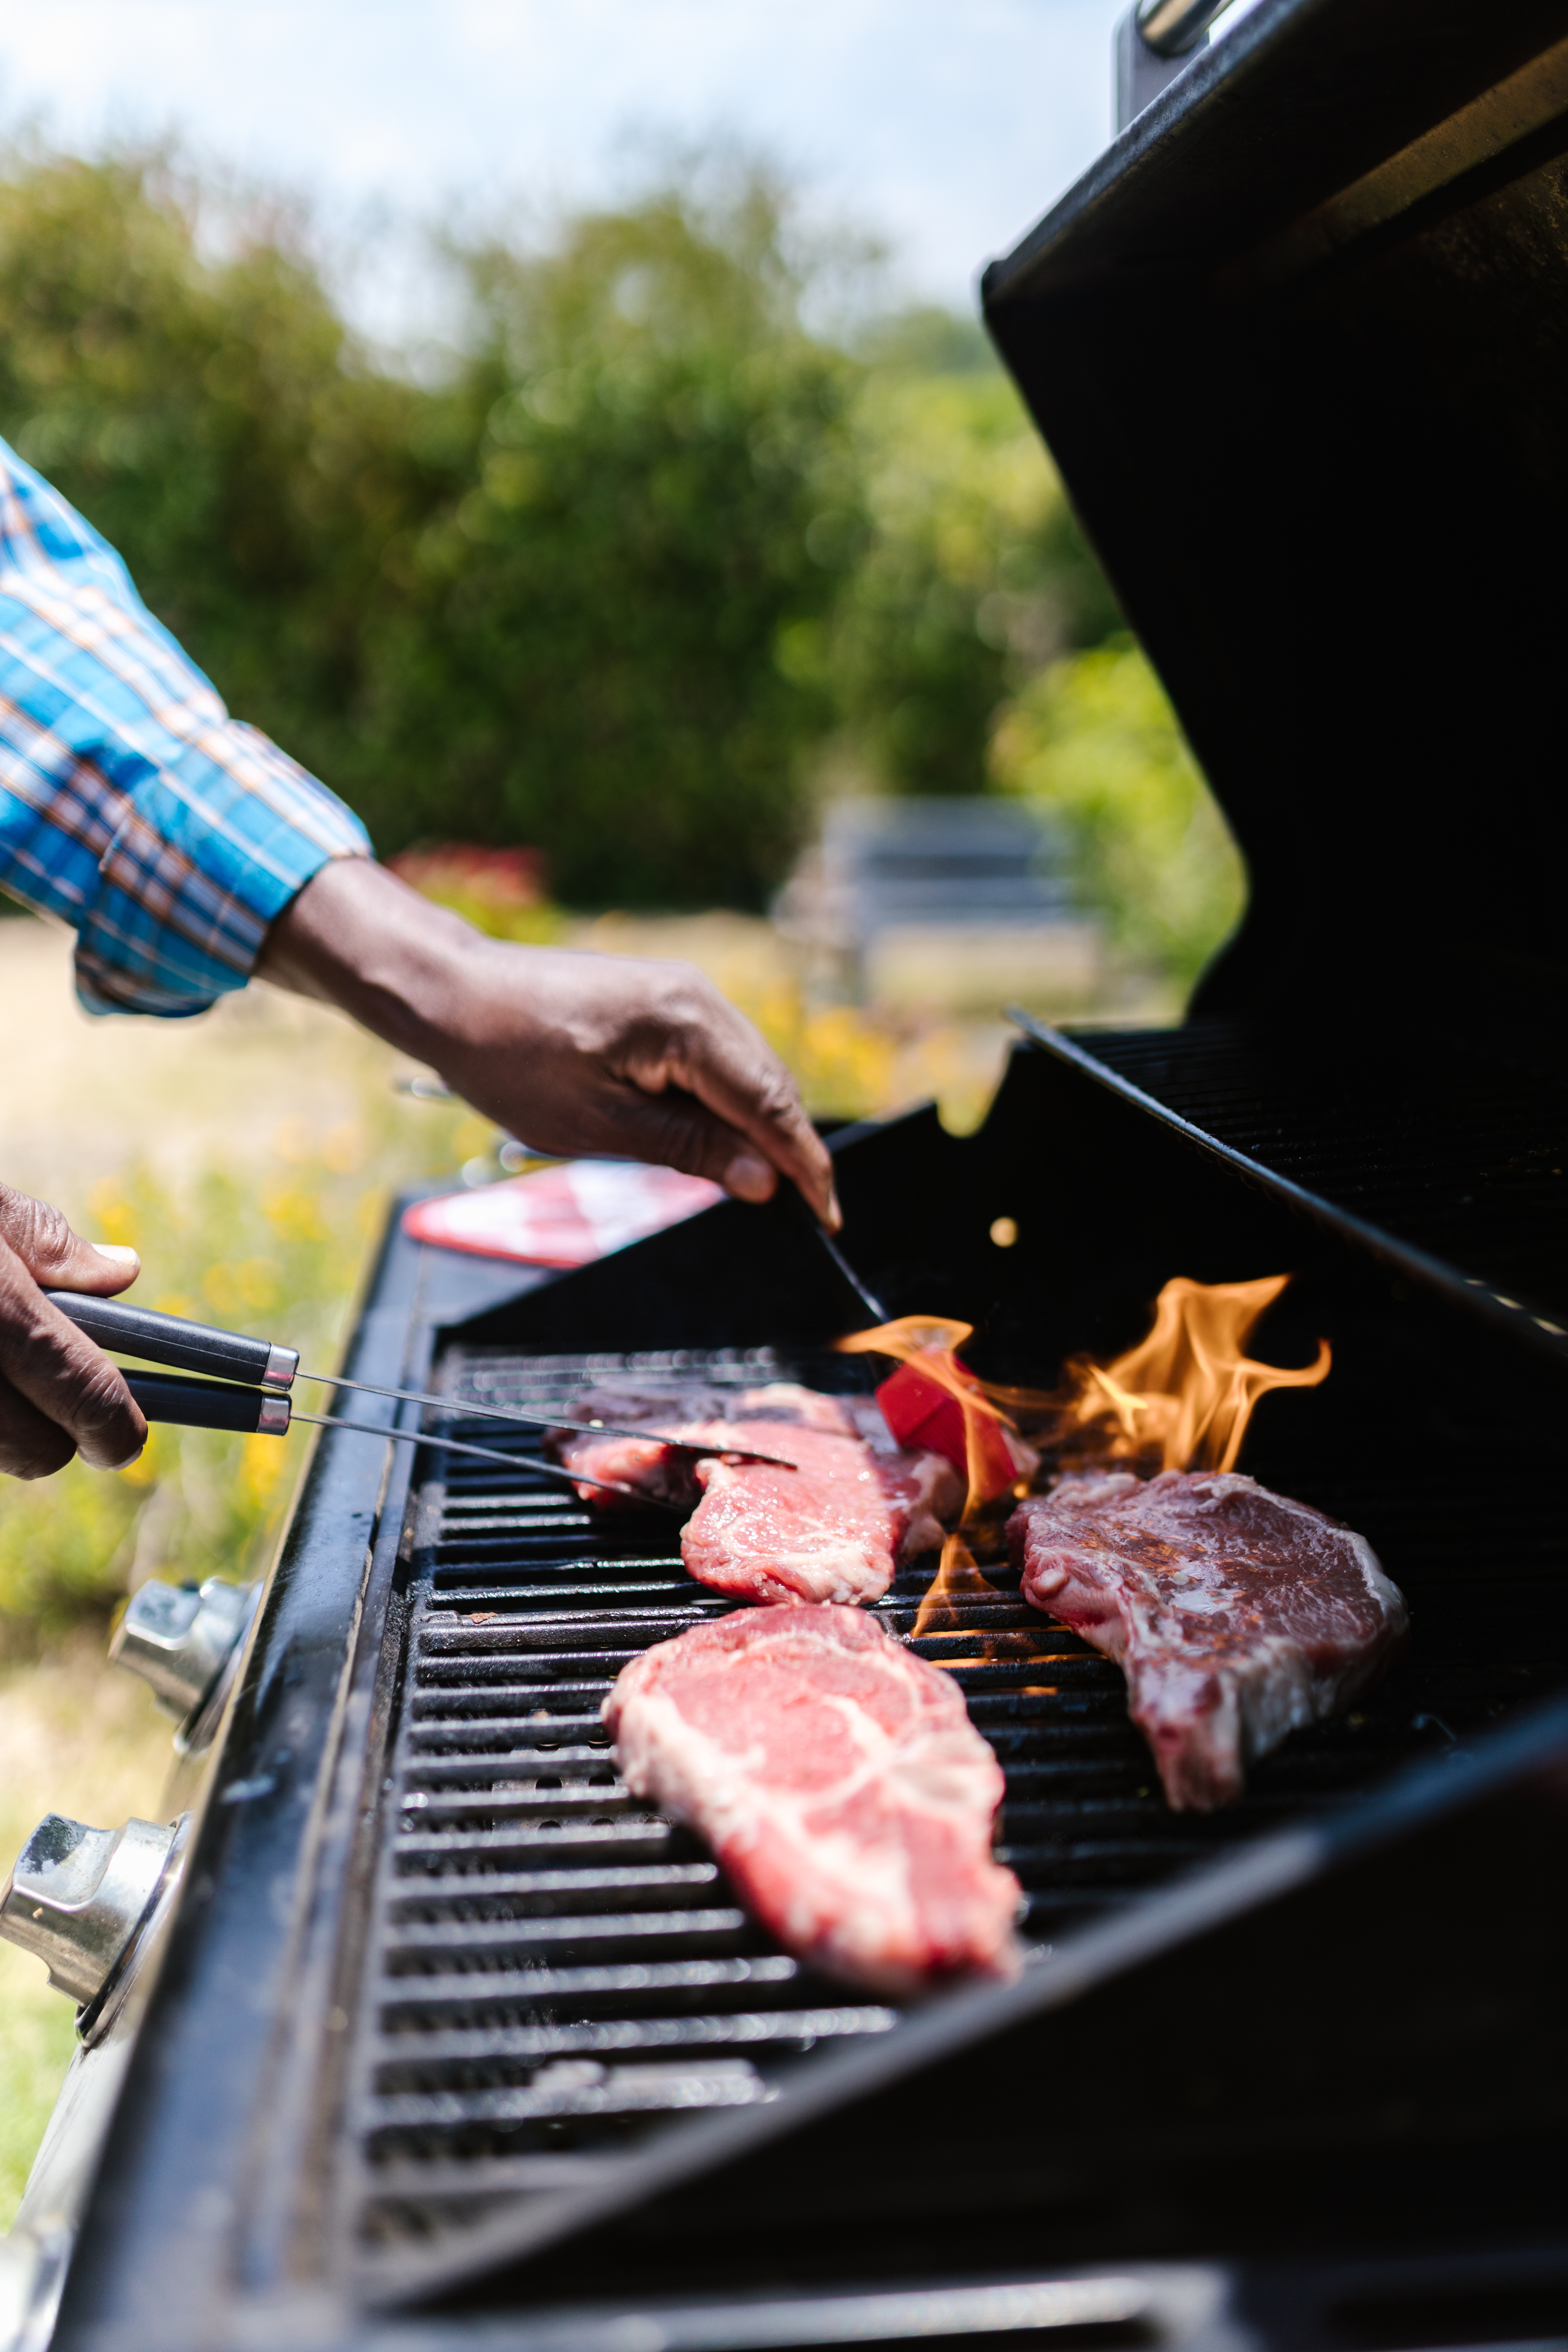 A person grilling meats on a gas BBQ